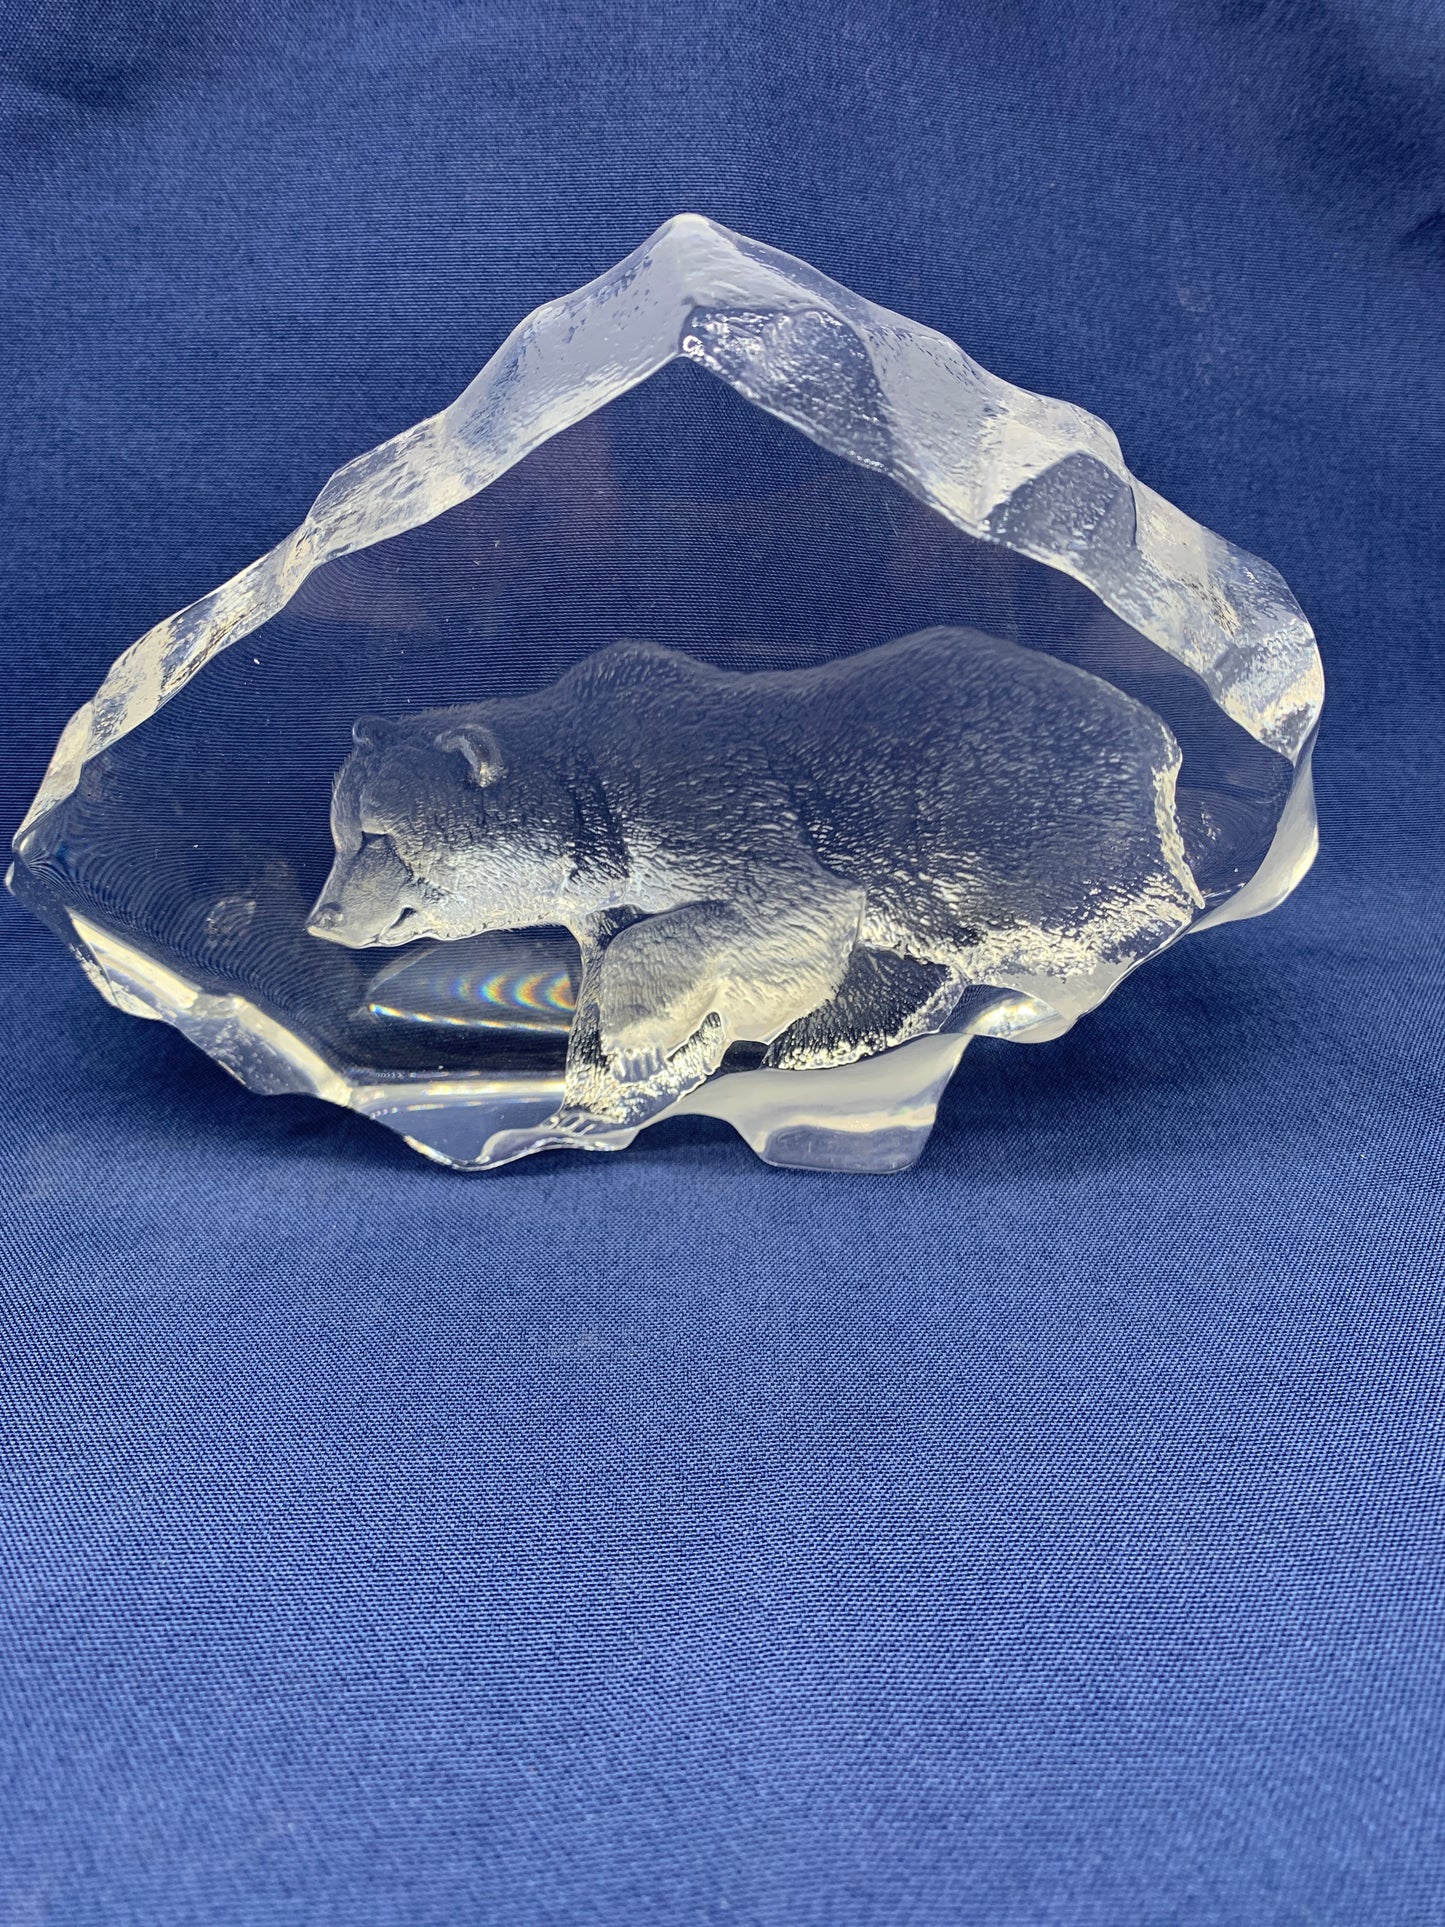 Bear Crystal Paperweight